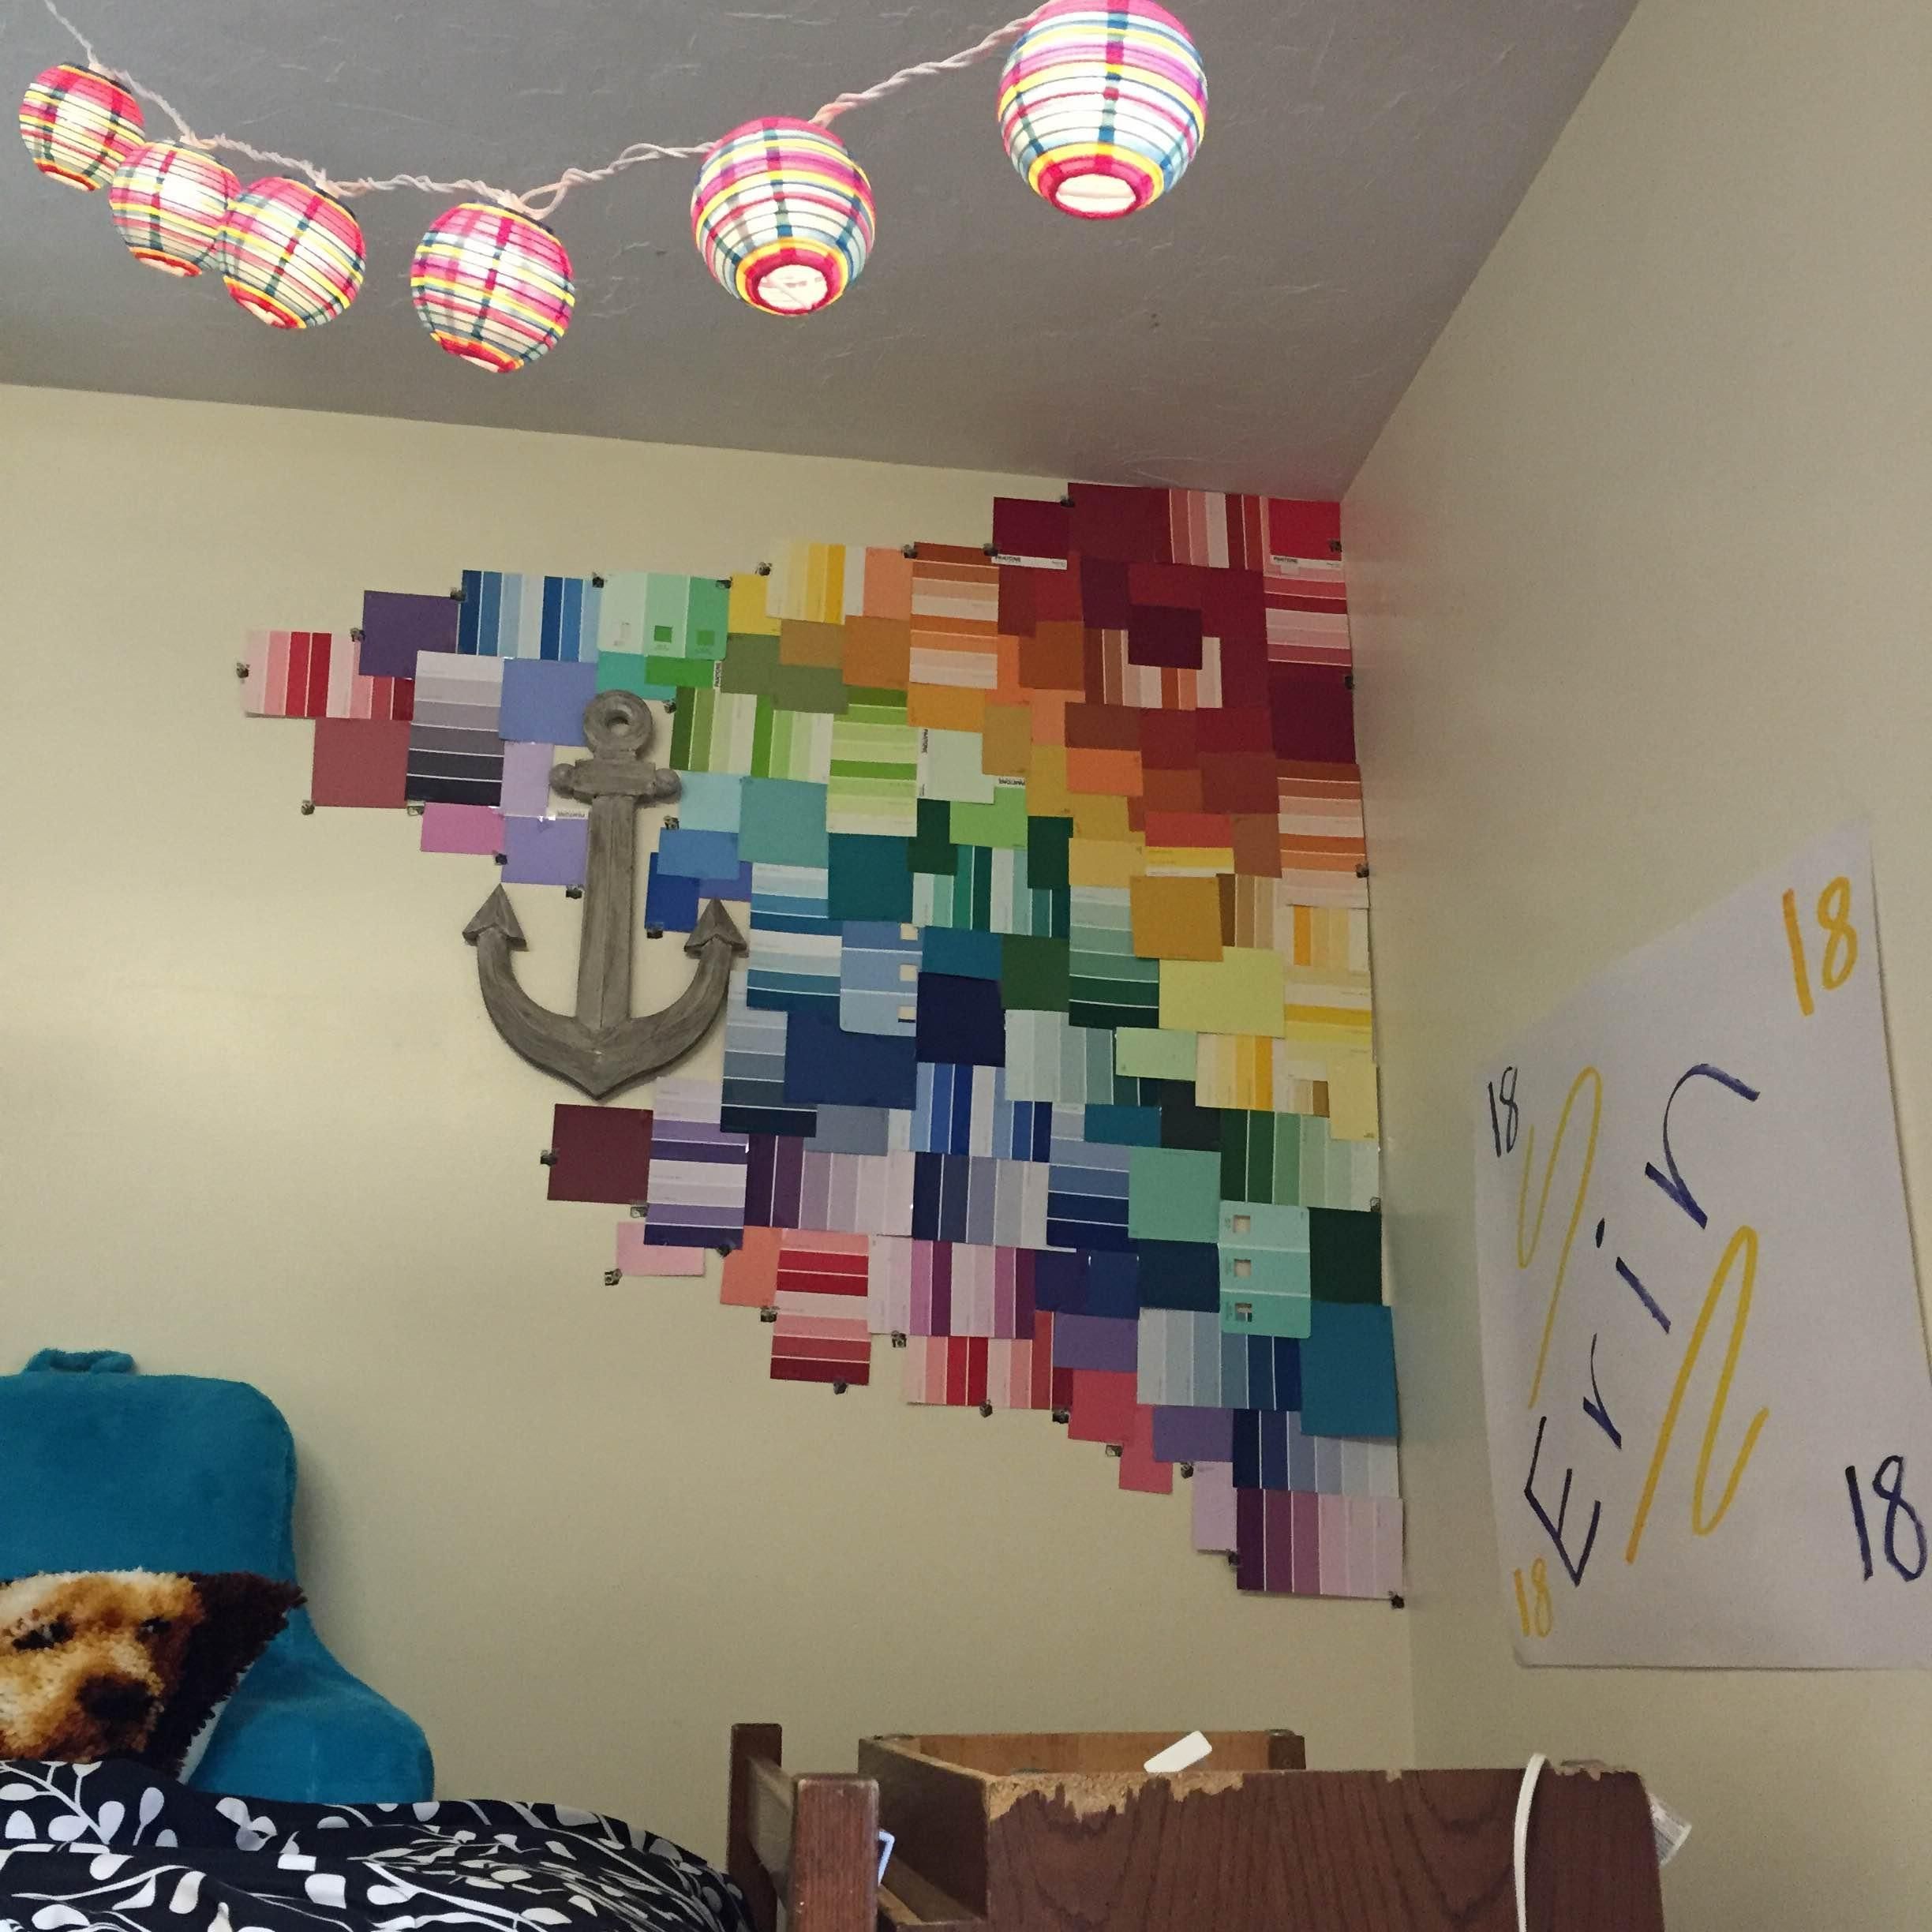 Dorm – Life In Orange And Blue | Hope College Throughout College Dorm Wall Art (View 5 of 20)